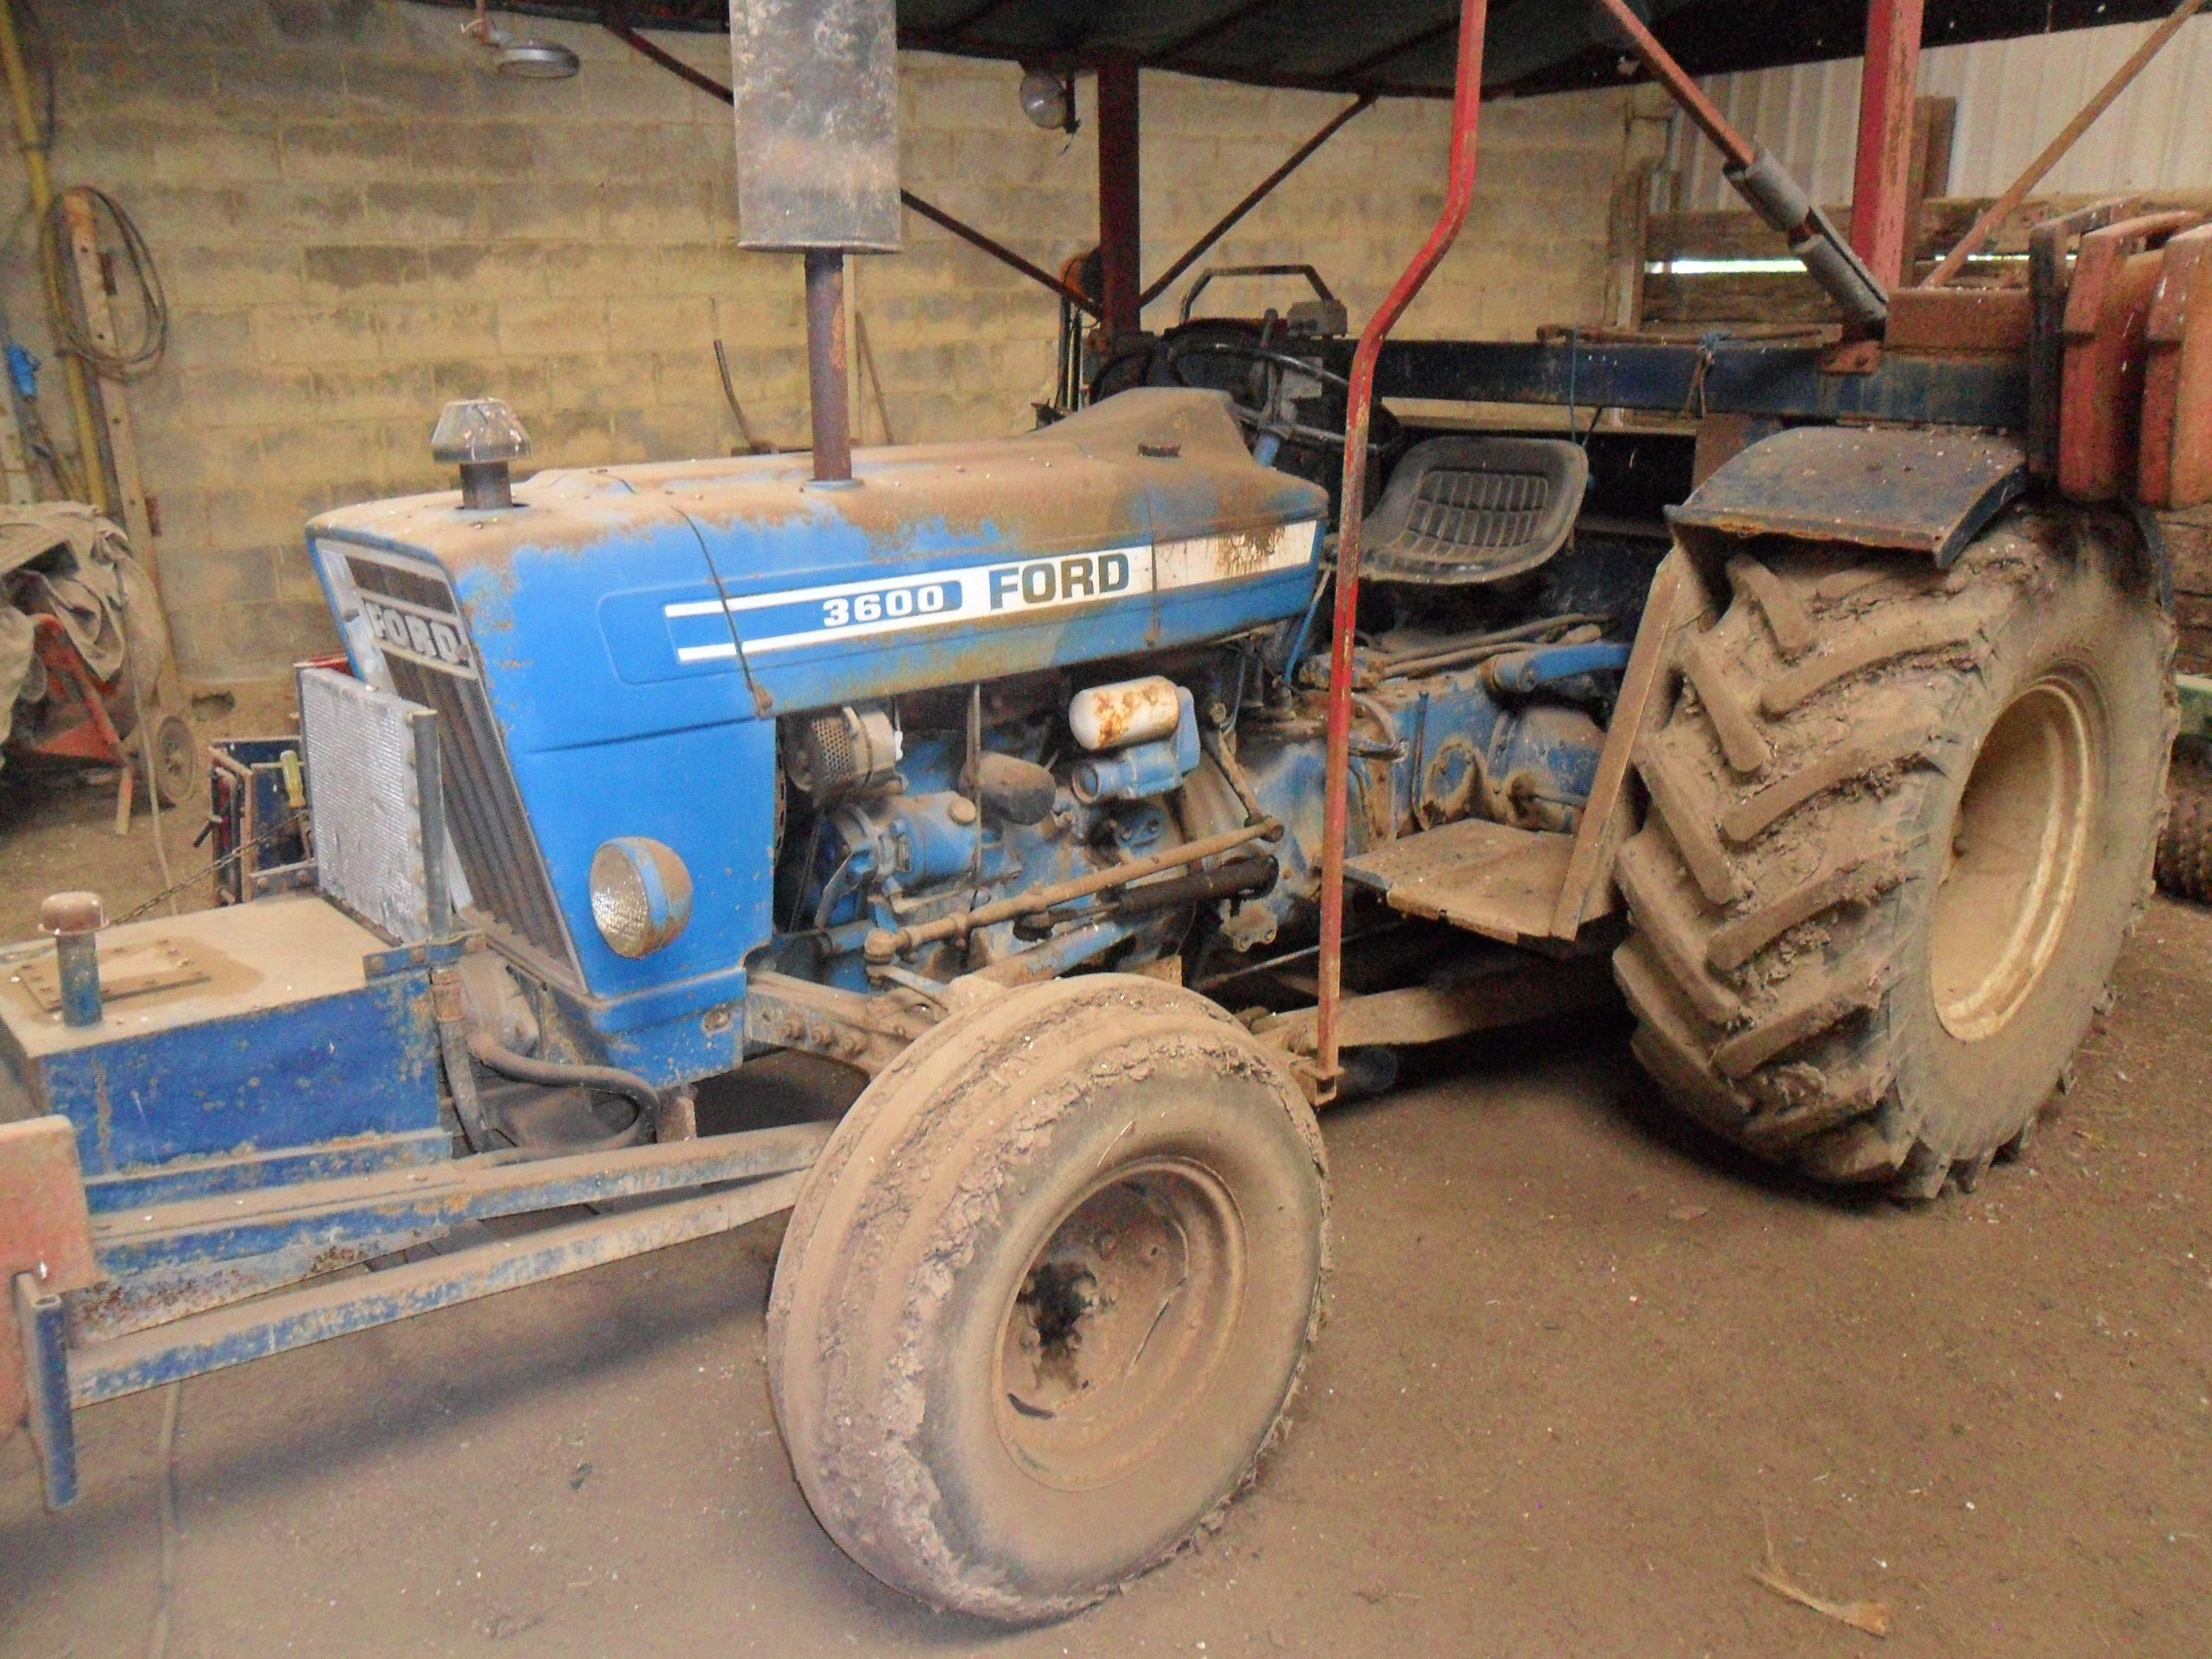 FORD 3600 BROUWER A3 TURF HARVESTER for sale